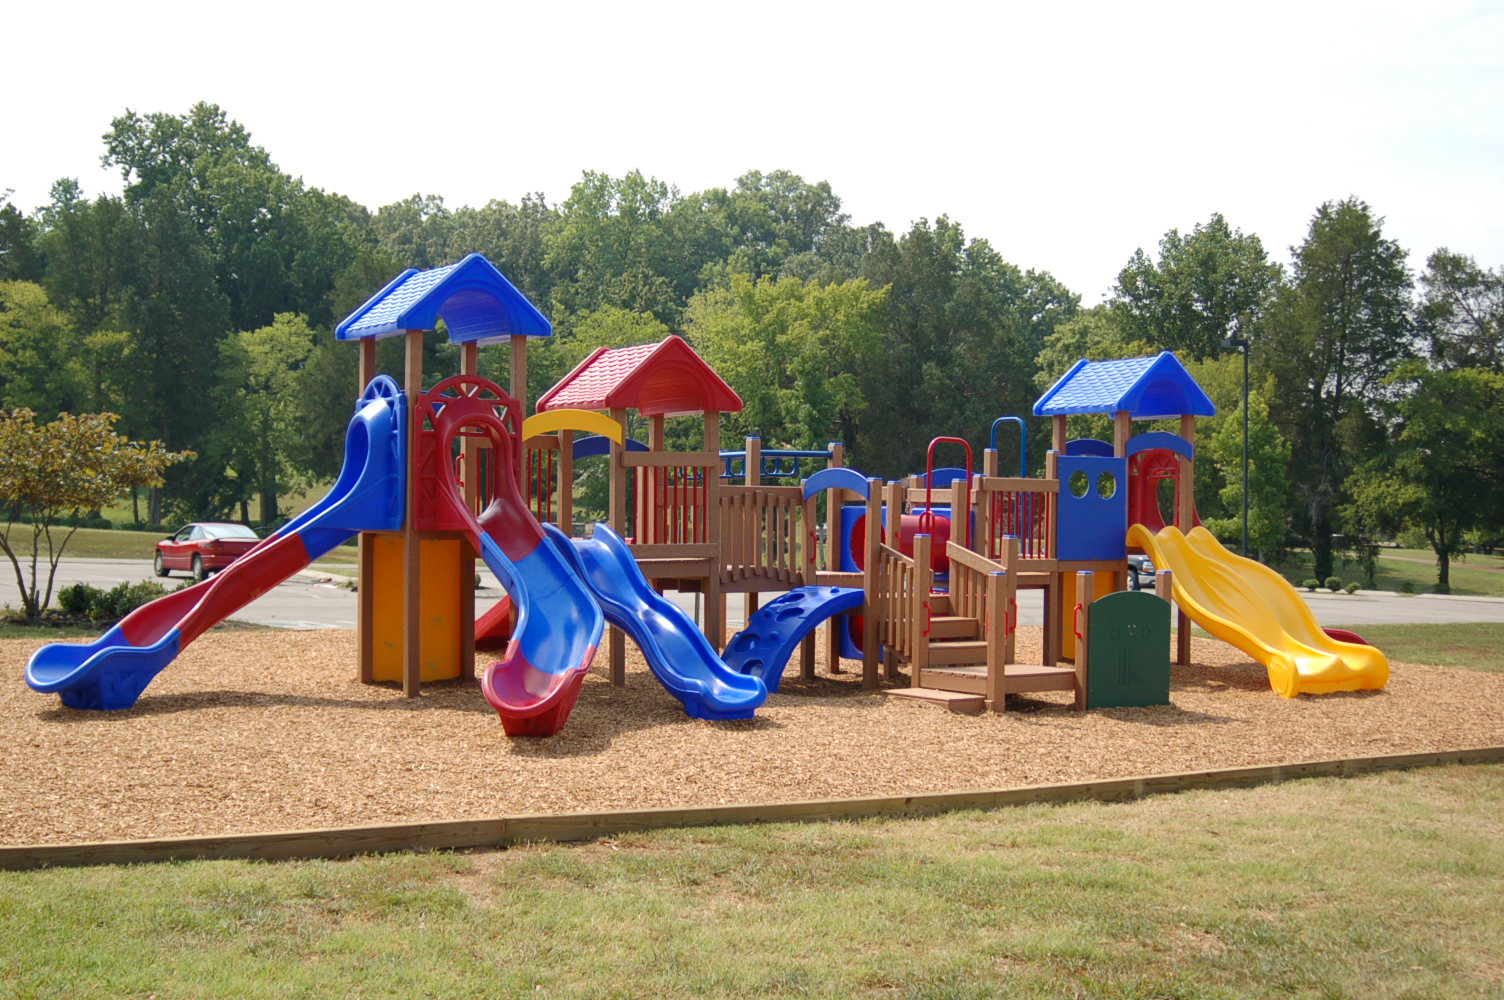 Playground Pics, Pattern Collection